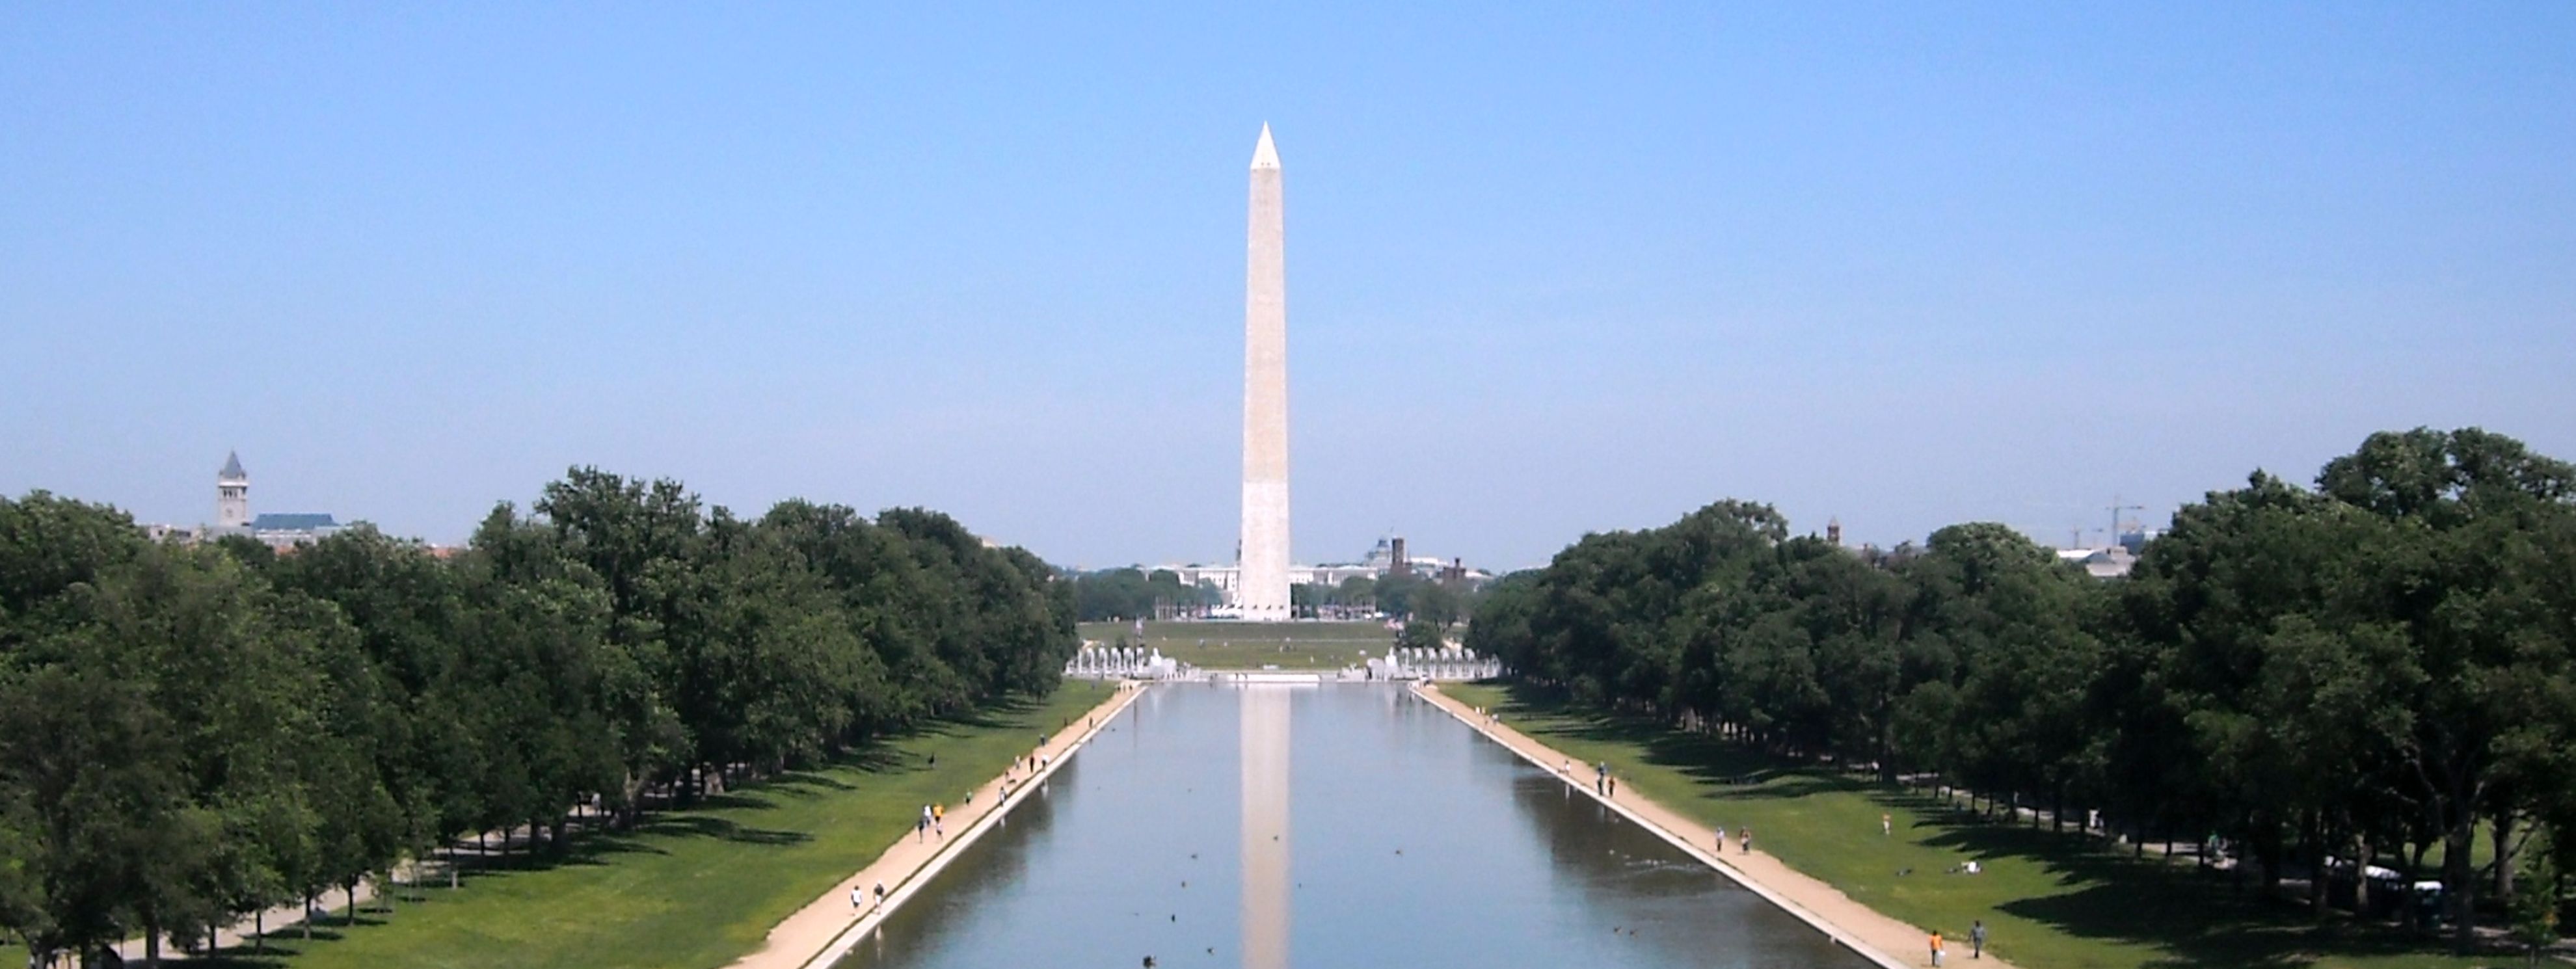 File:Washington Monument view from Lincoln Memorial.JPG - Wikimedia ...